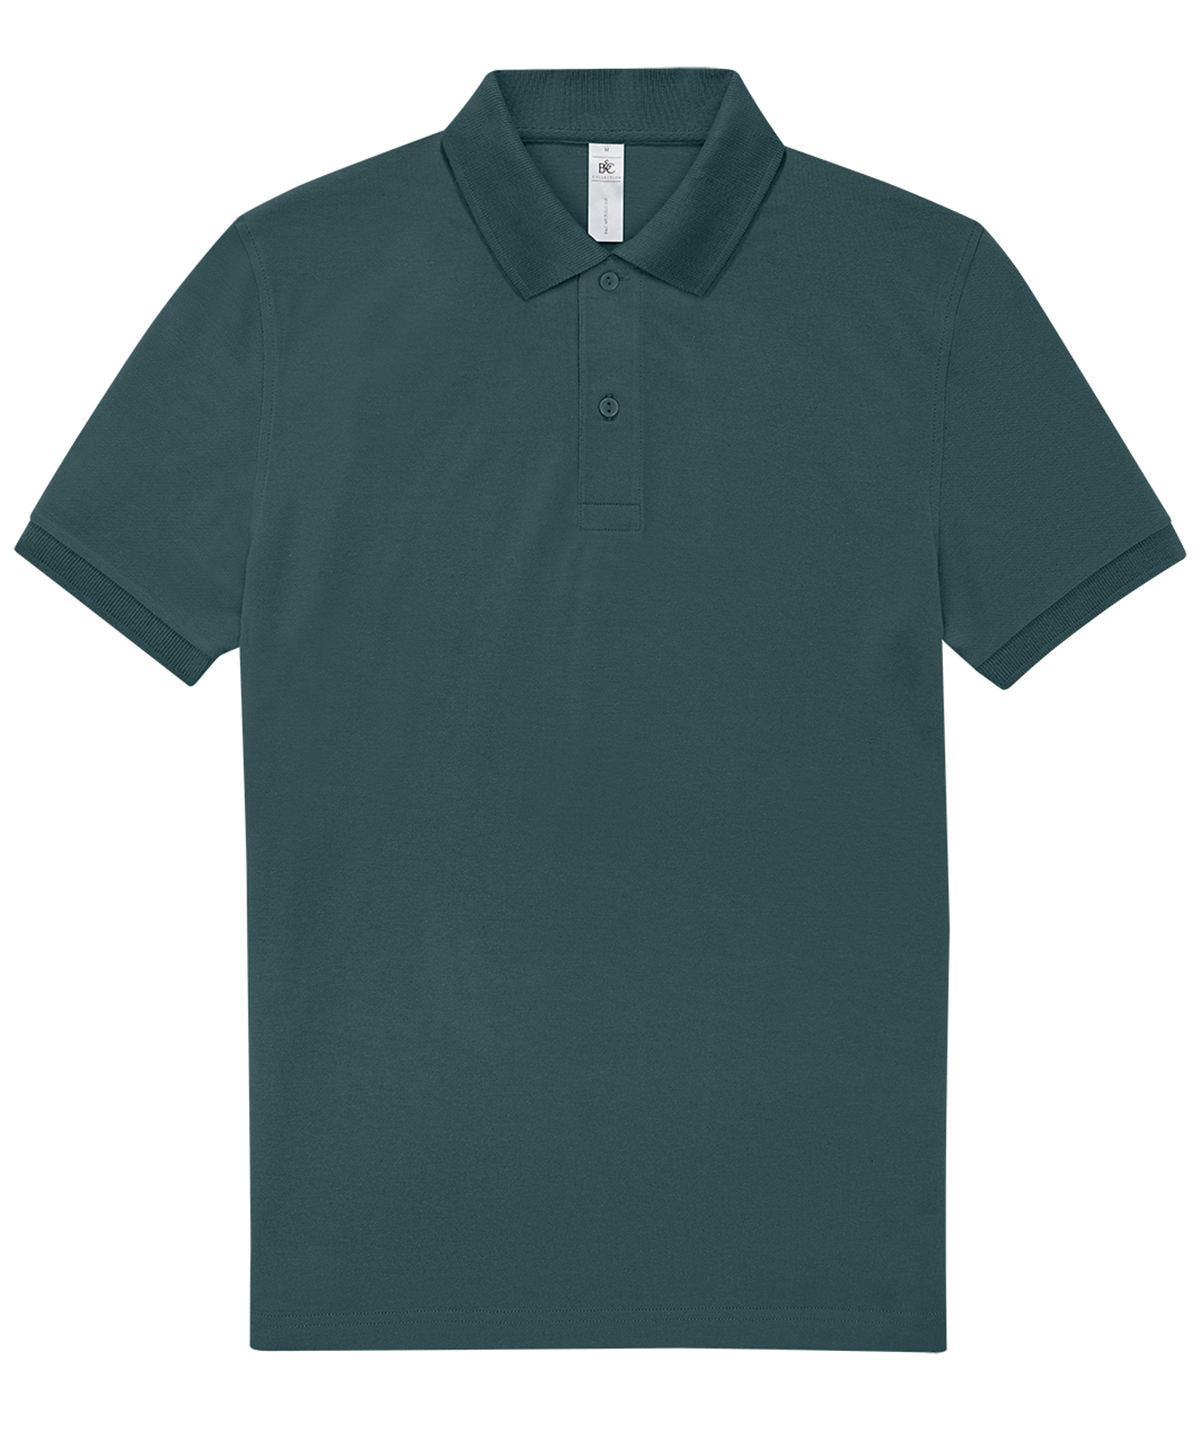 Personalised Polo Shirts - Mid Blue B&C Collection B&C My Polo 210